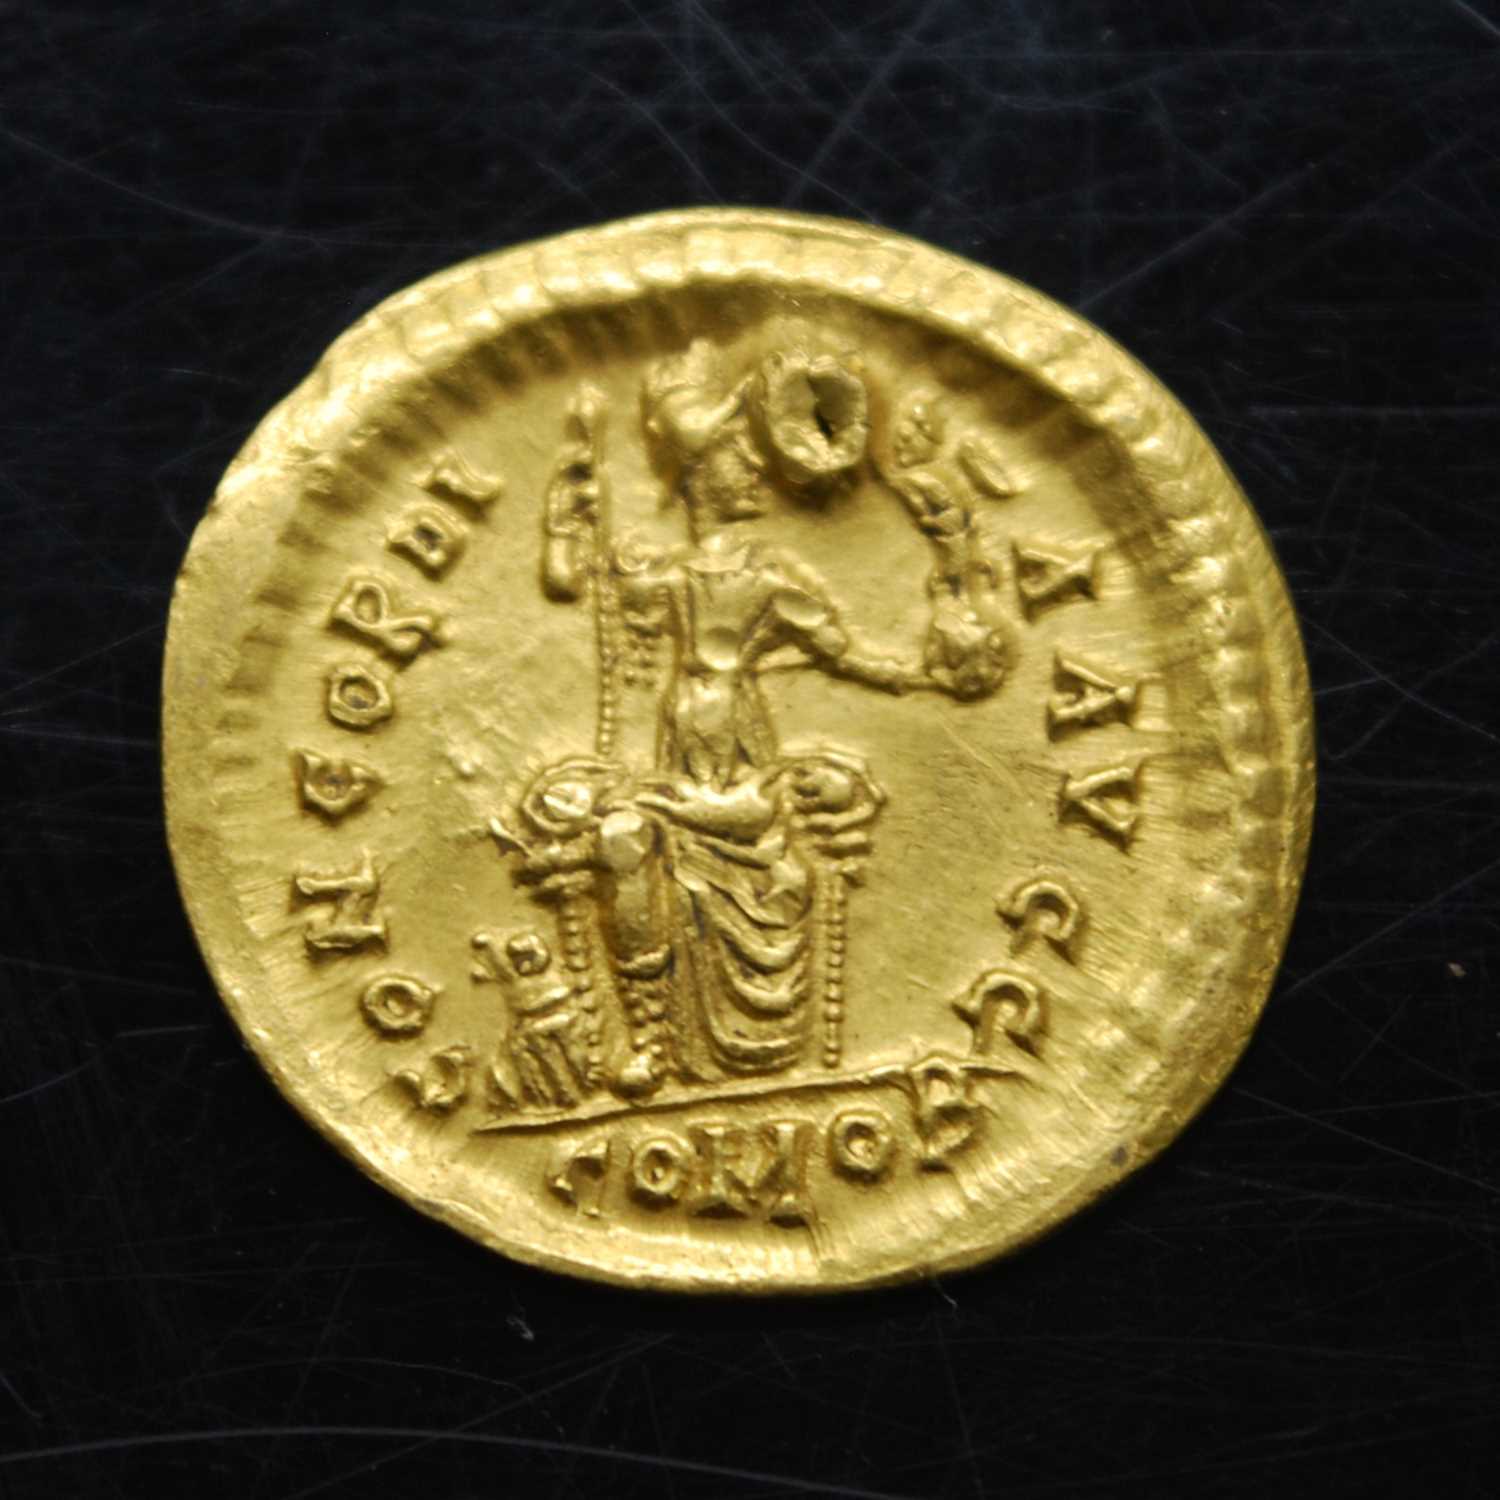 Western Roman Empire, Honorius (AD 393-423) gold solidus, obv; bust of Honorius, helmeted, shield - Image 3 of 3